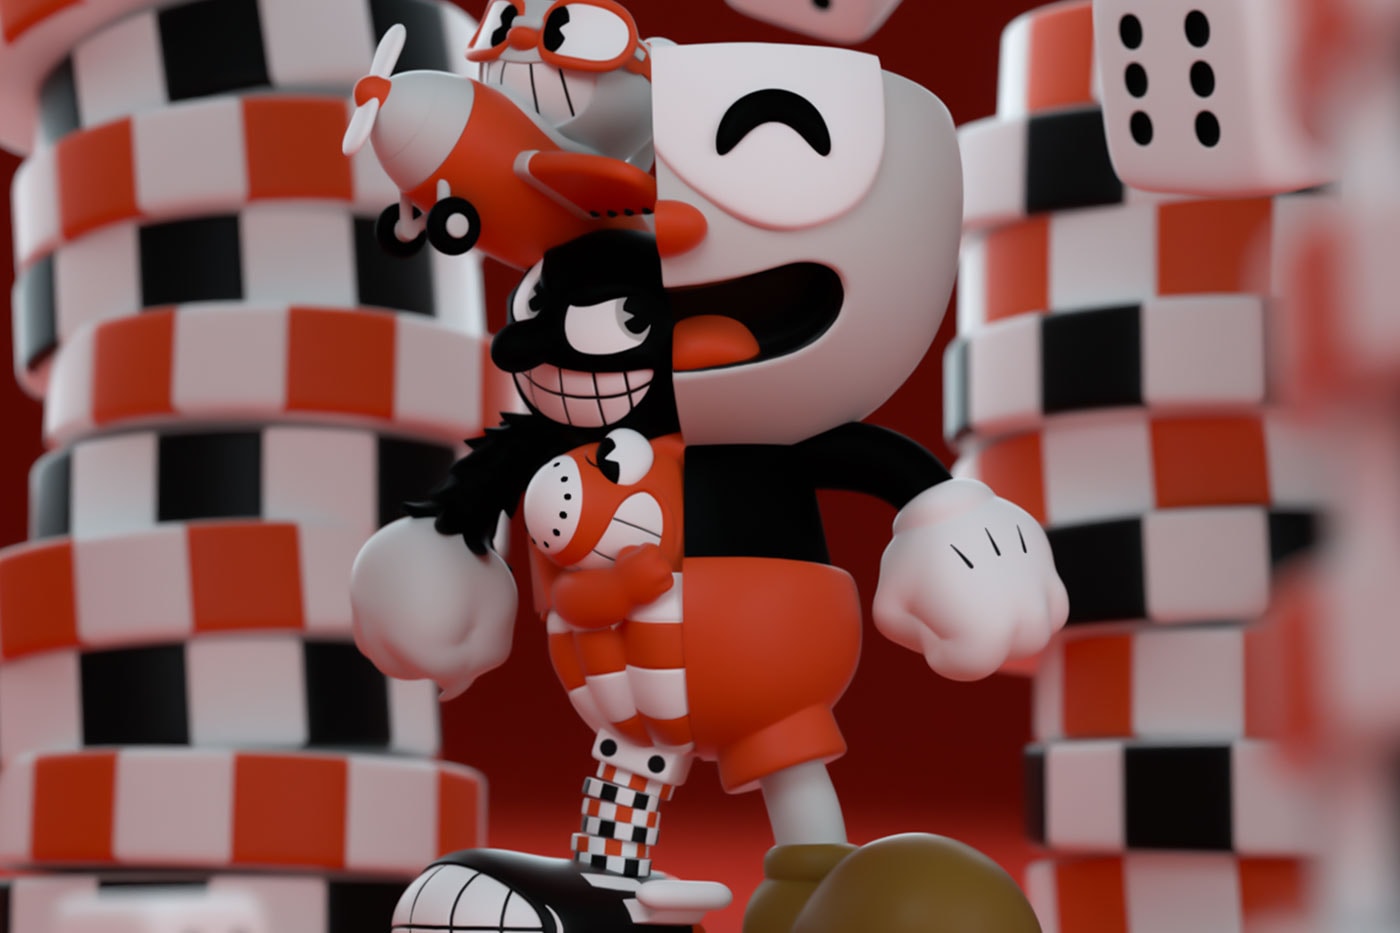 If bendy was in the cuphead show 